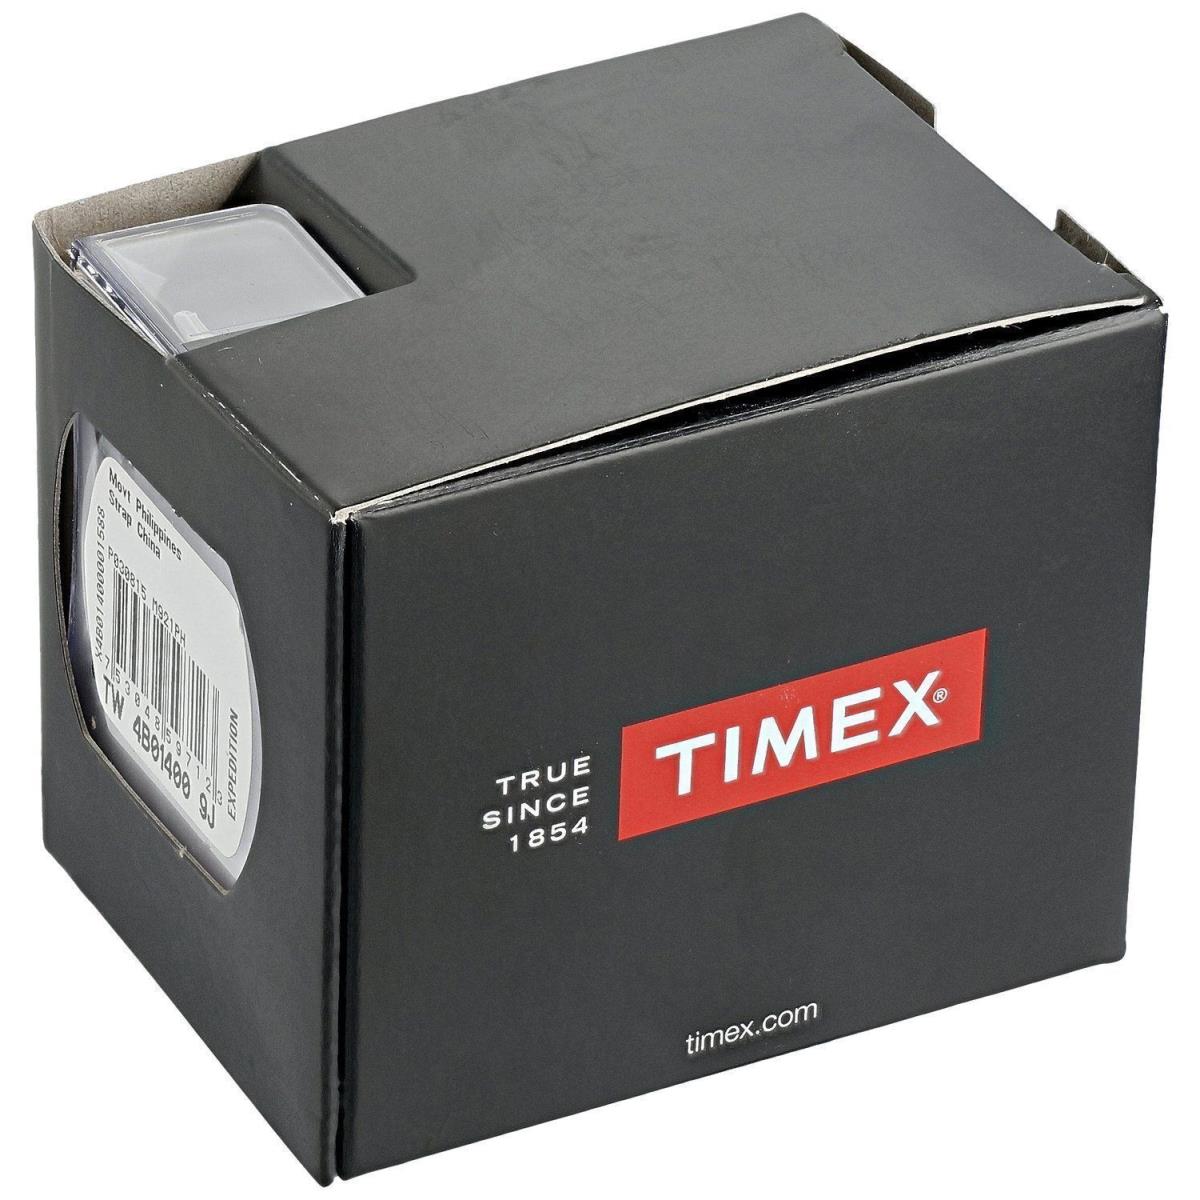 Timex TW2U85000 Men`s Easy Reader Blue Nylon Wrapstrap Watch Indiglo Date - Dial: Black, Band: Blue